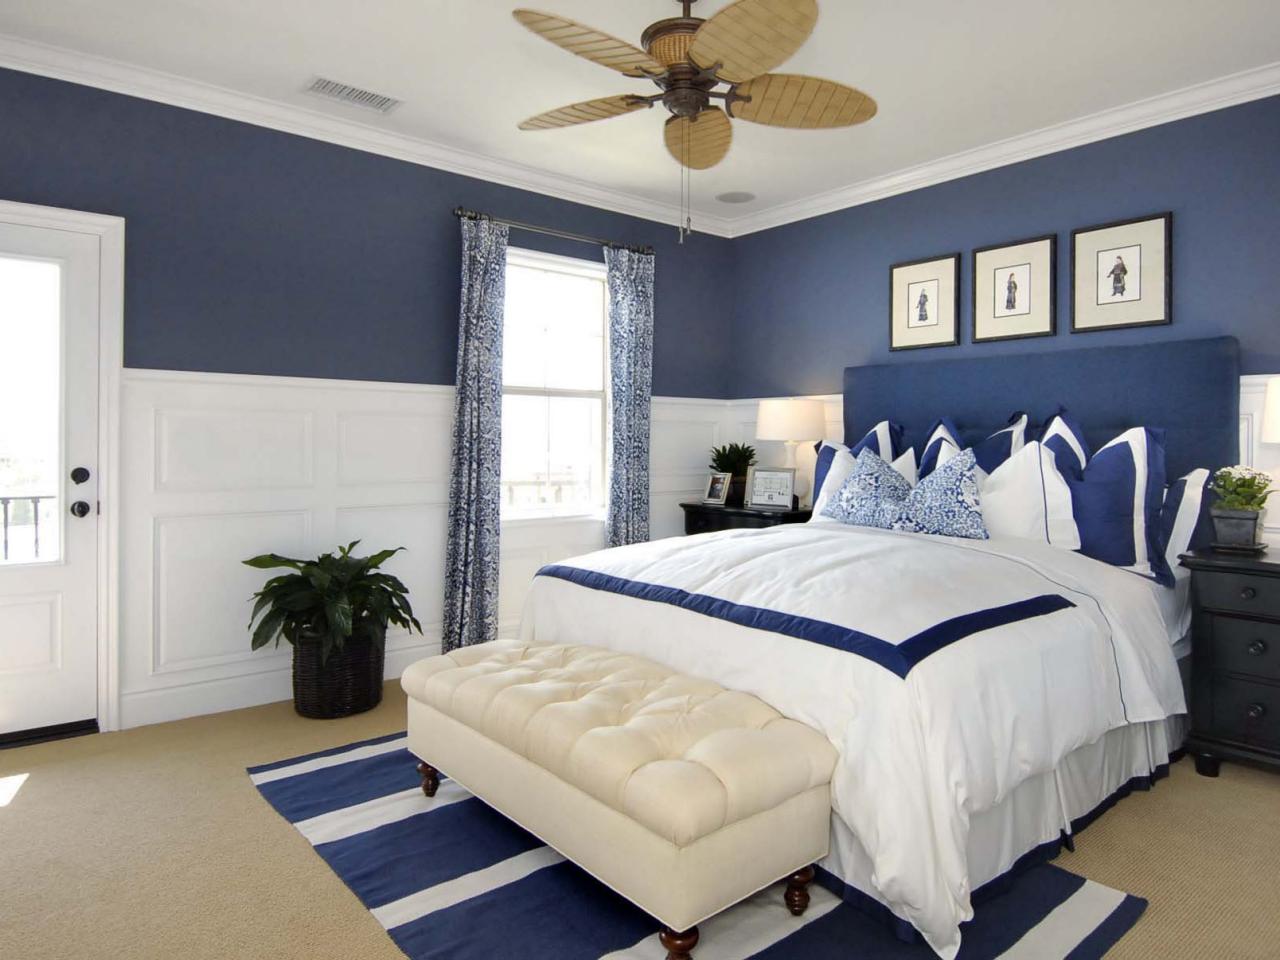 install a fan in guest room 45 ideas for the ultimate guest room